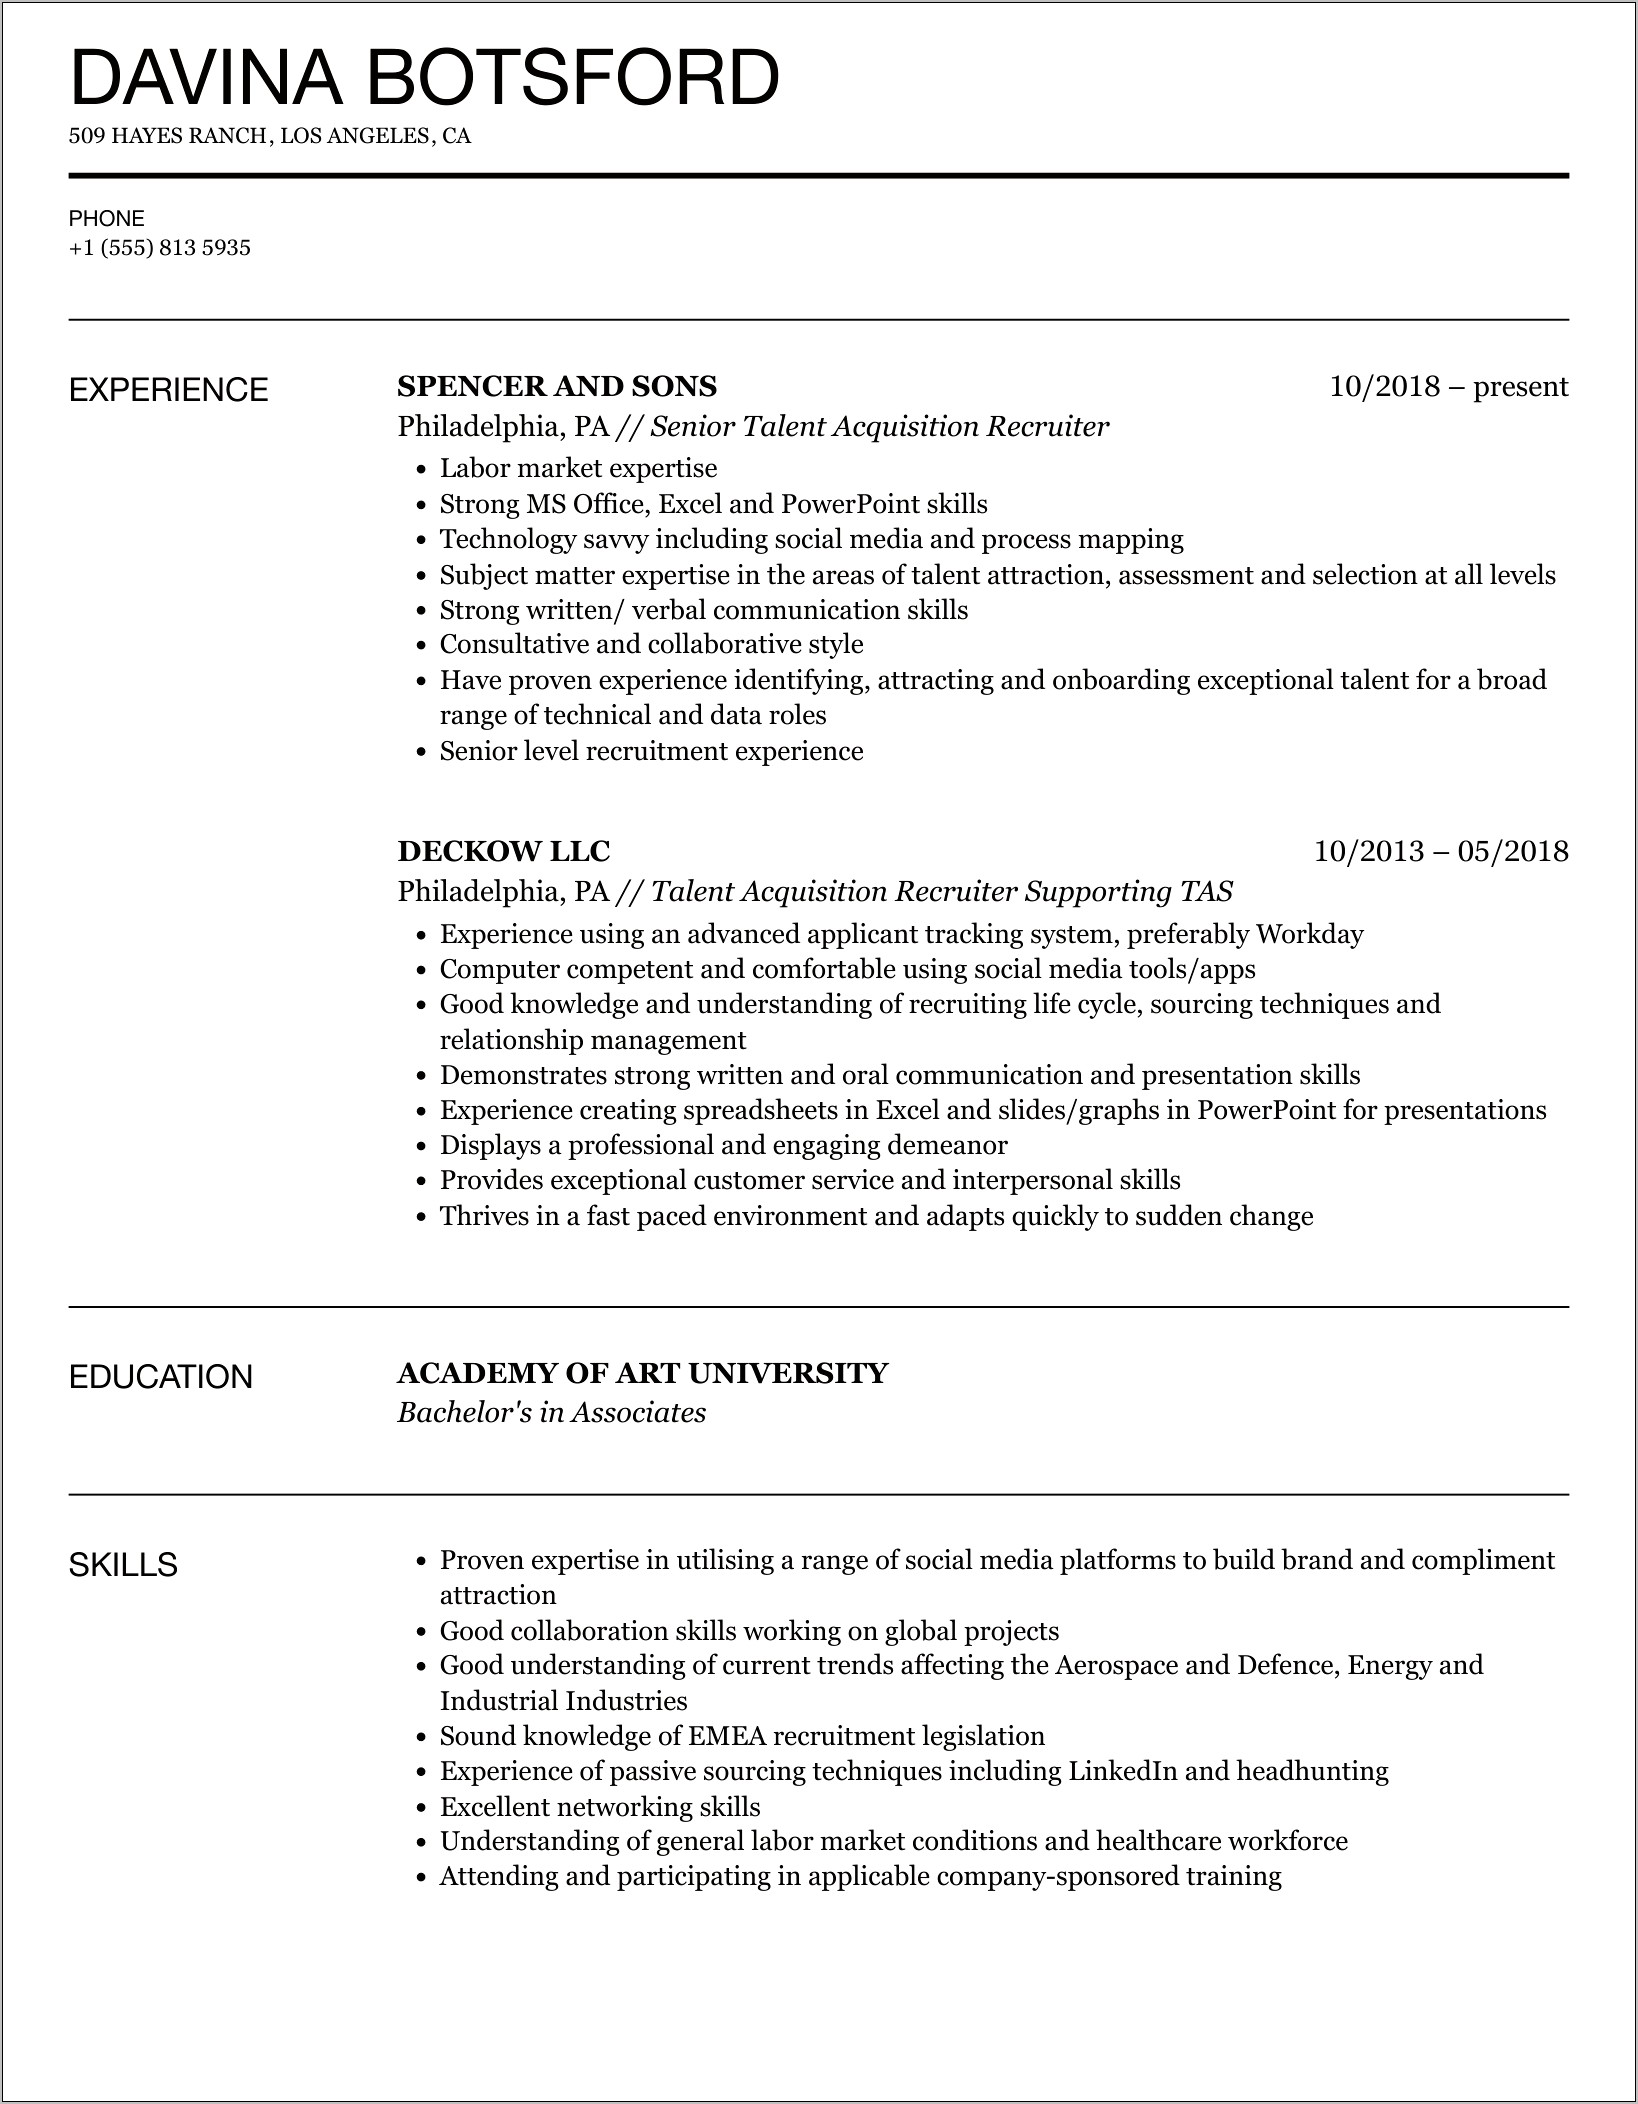 Resume Summary Objective For Recruiter